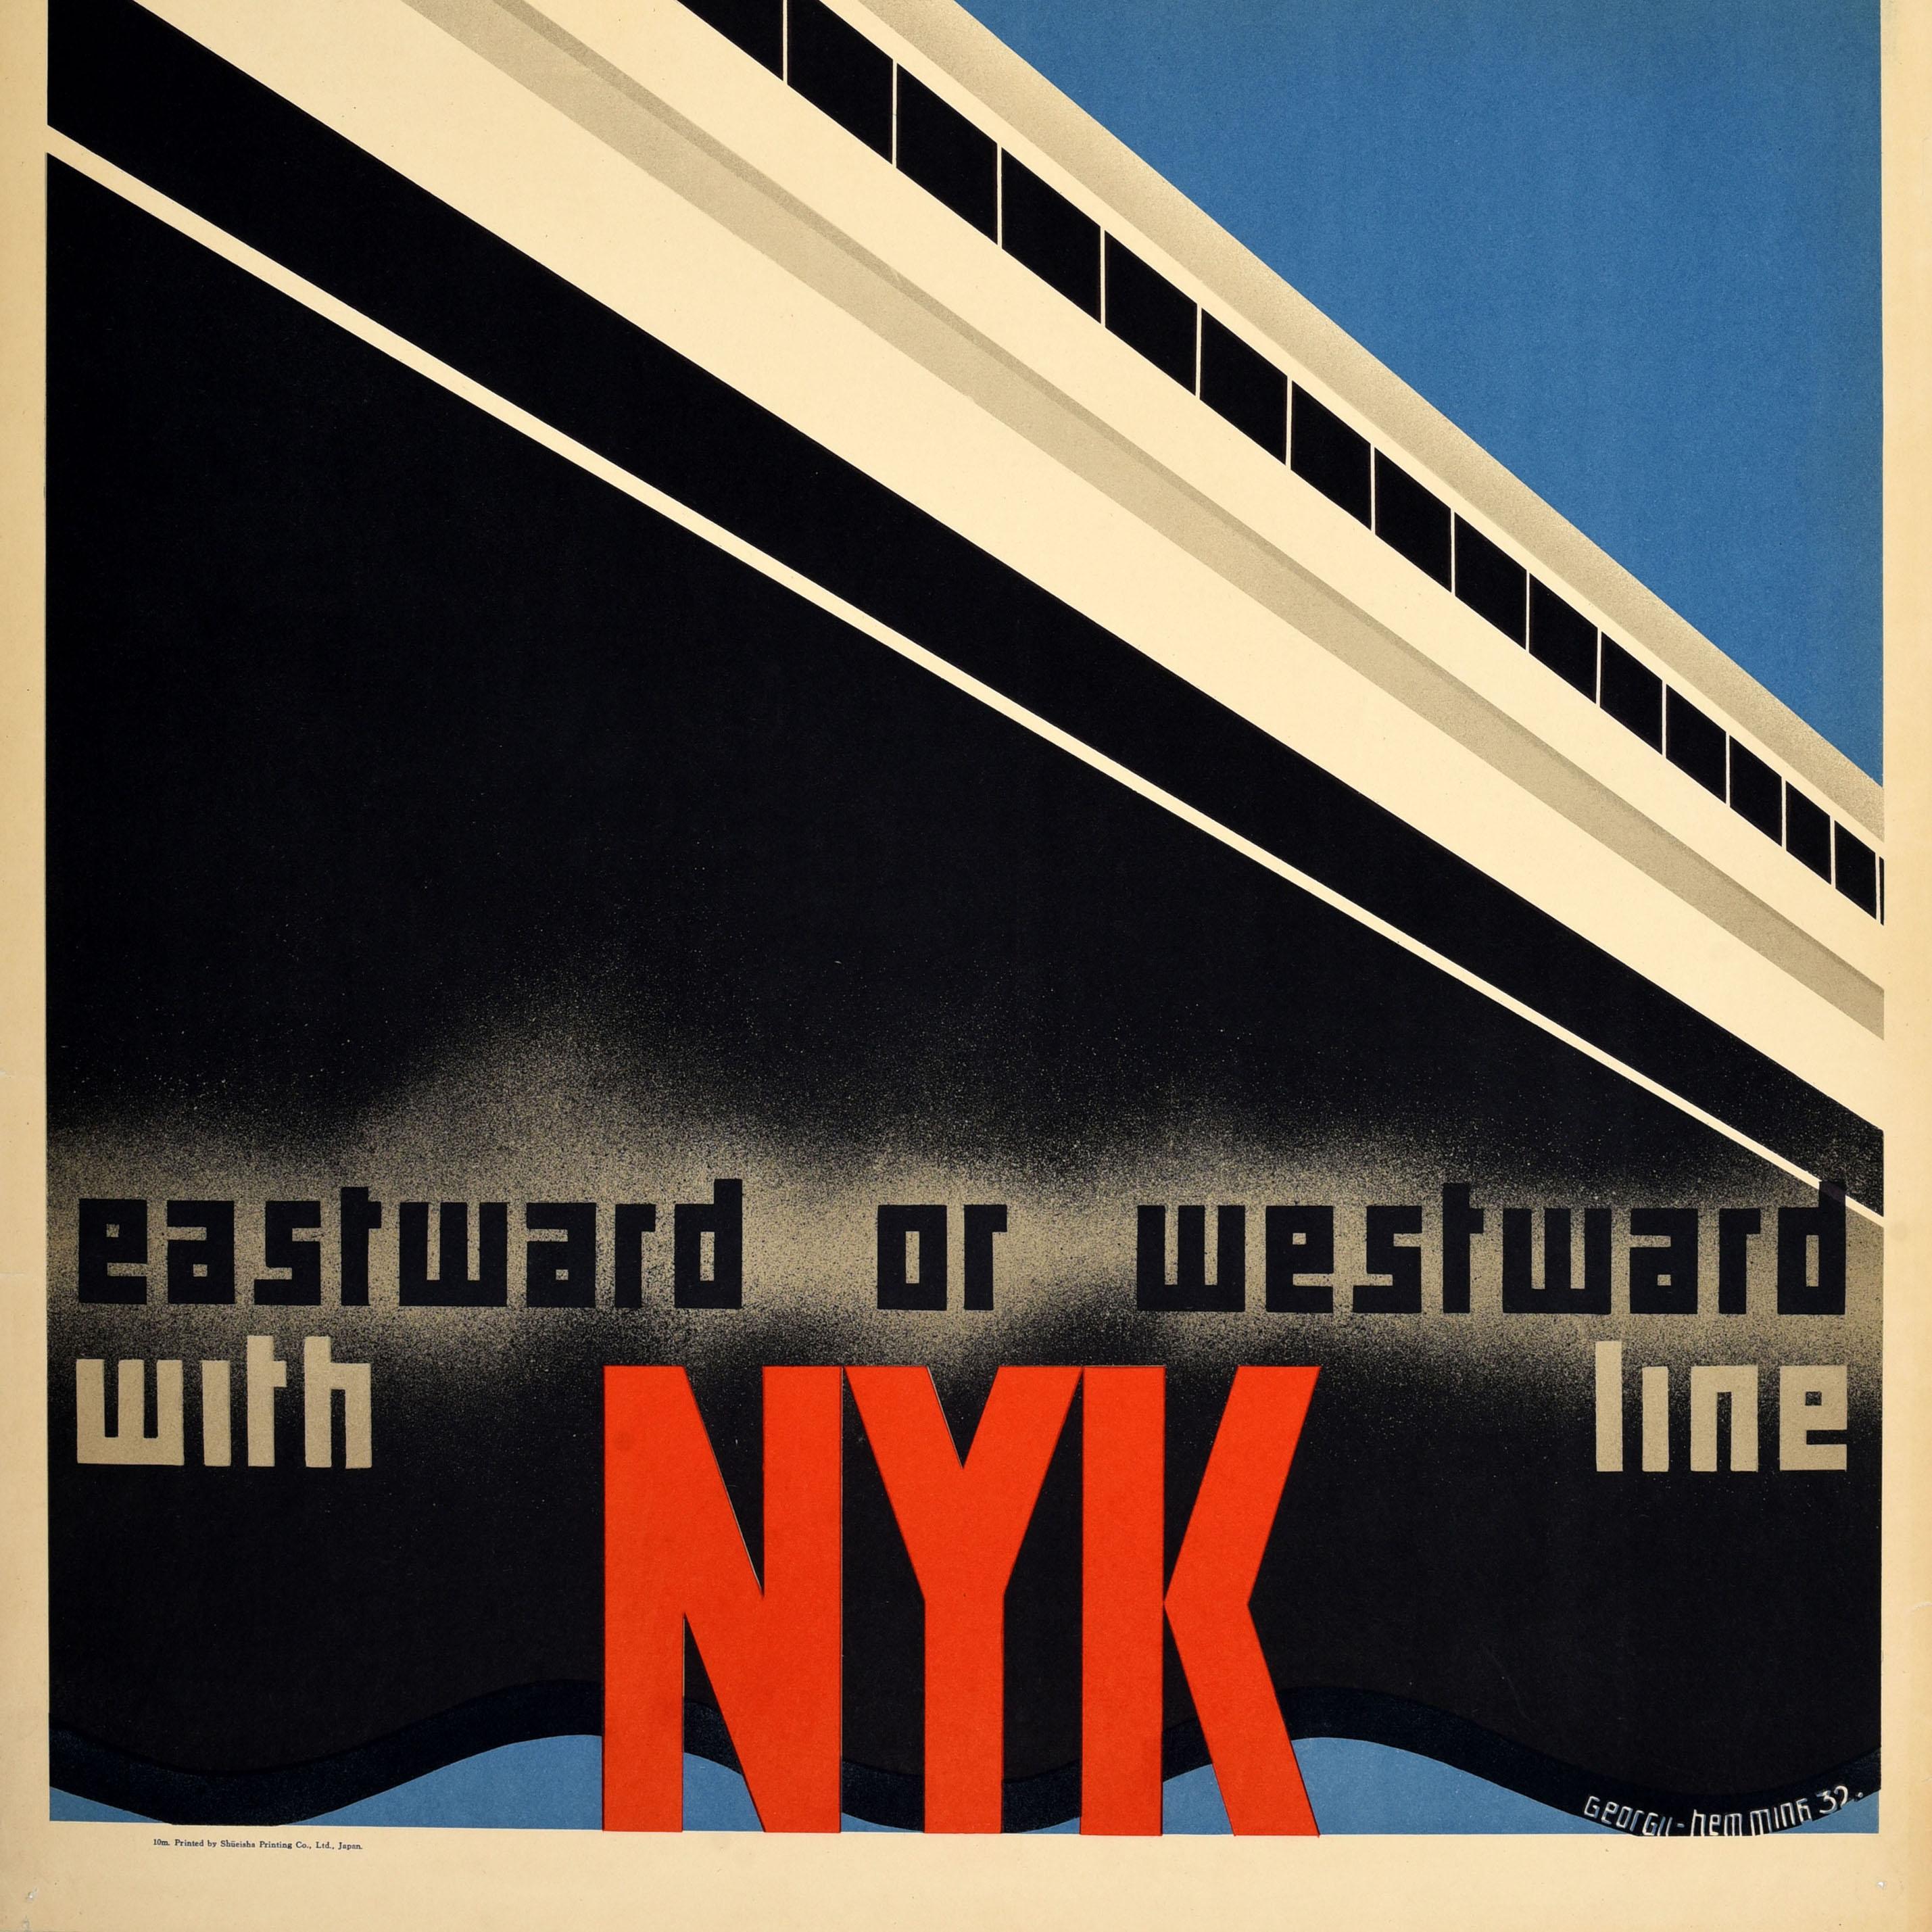 Original Vintage Travel Advertising Poster NYK Line Around The World Art Deco In Good Condition For Sale In London, GB